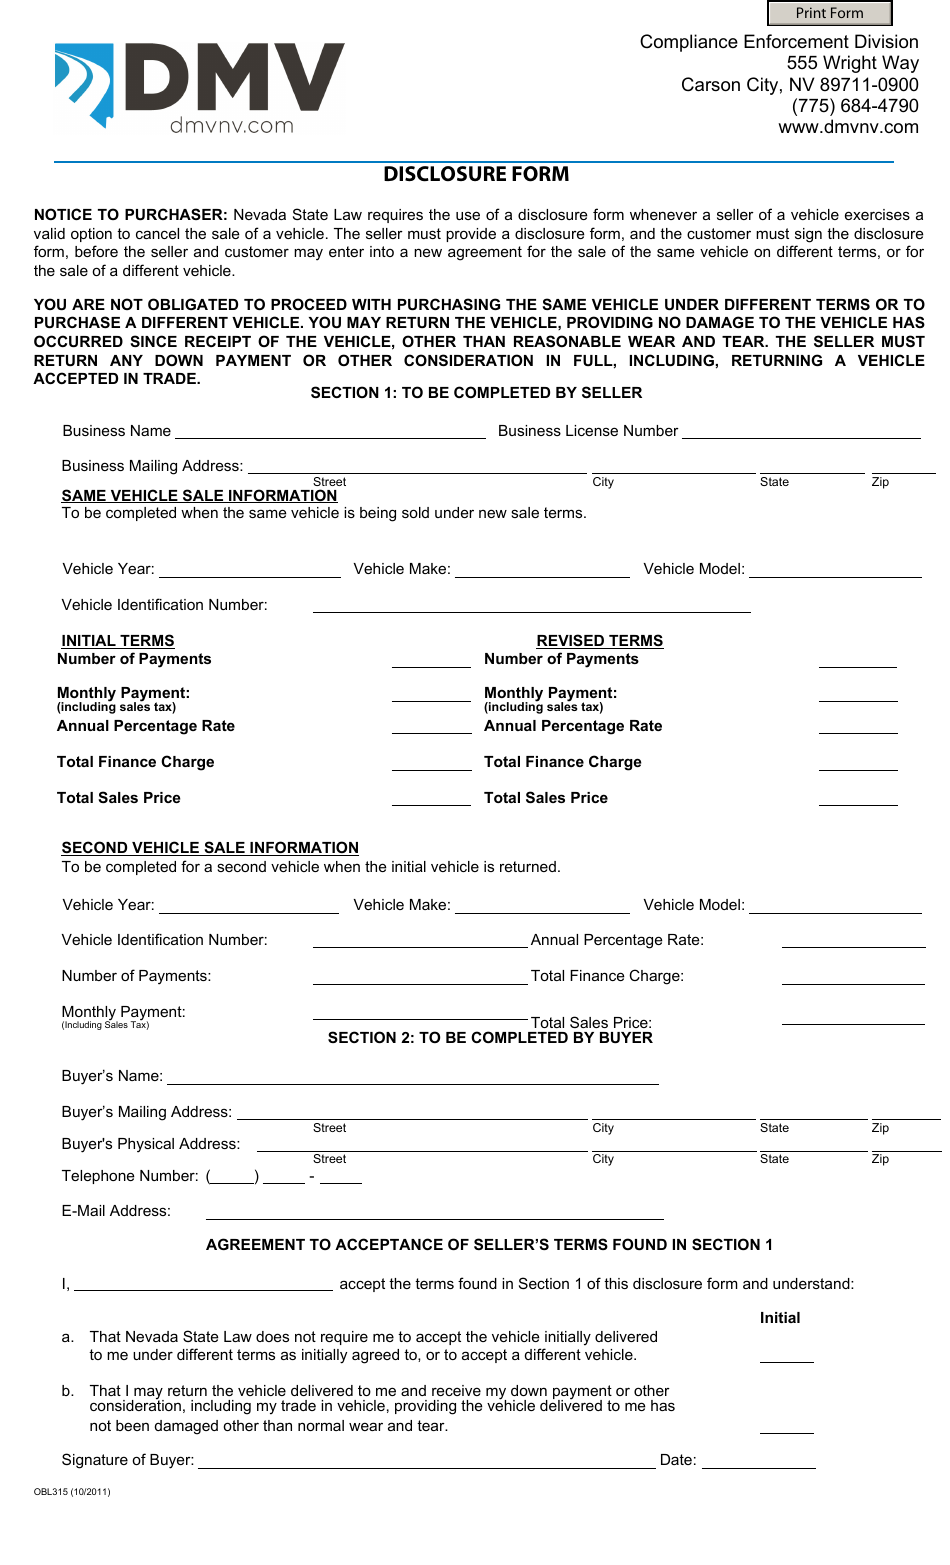 Form OBL315 Disclosure Form - Nevada, Page 1